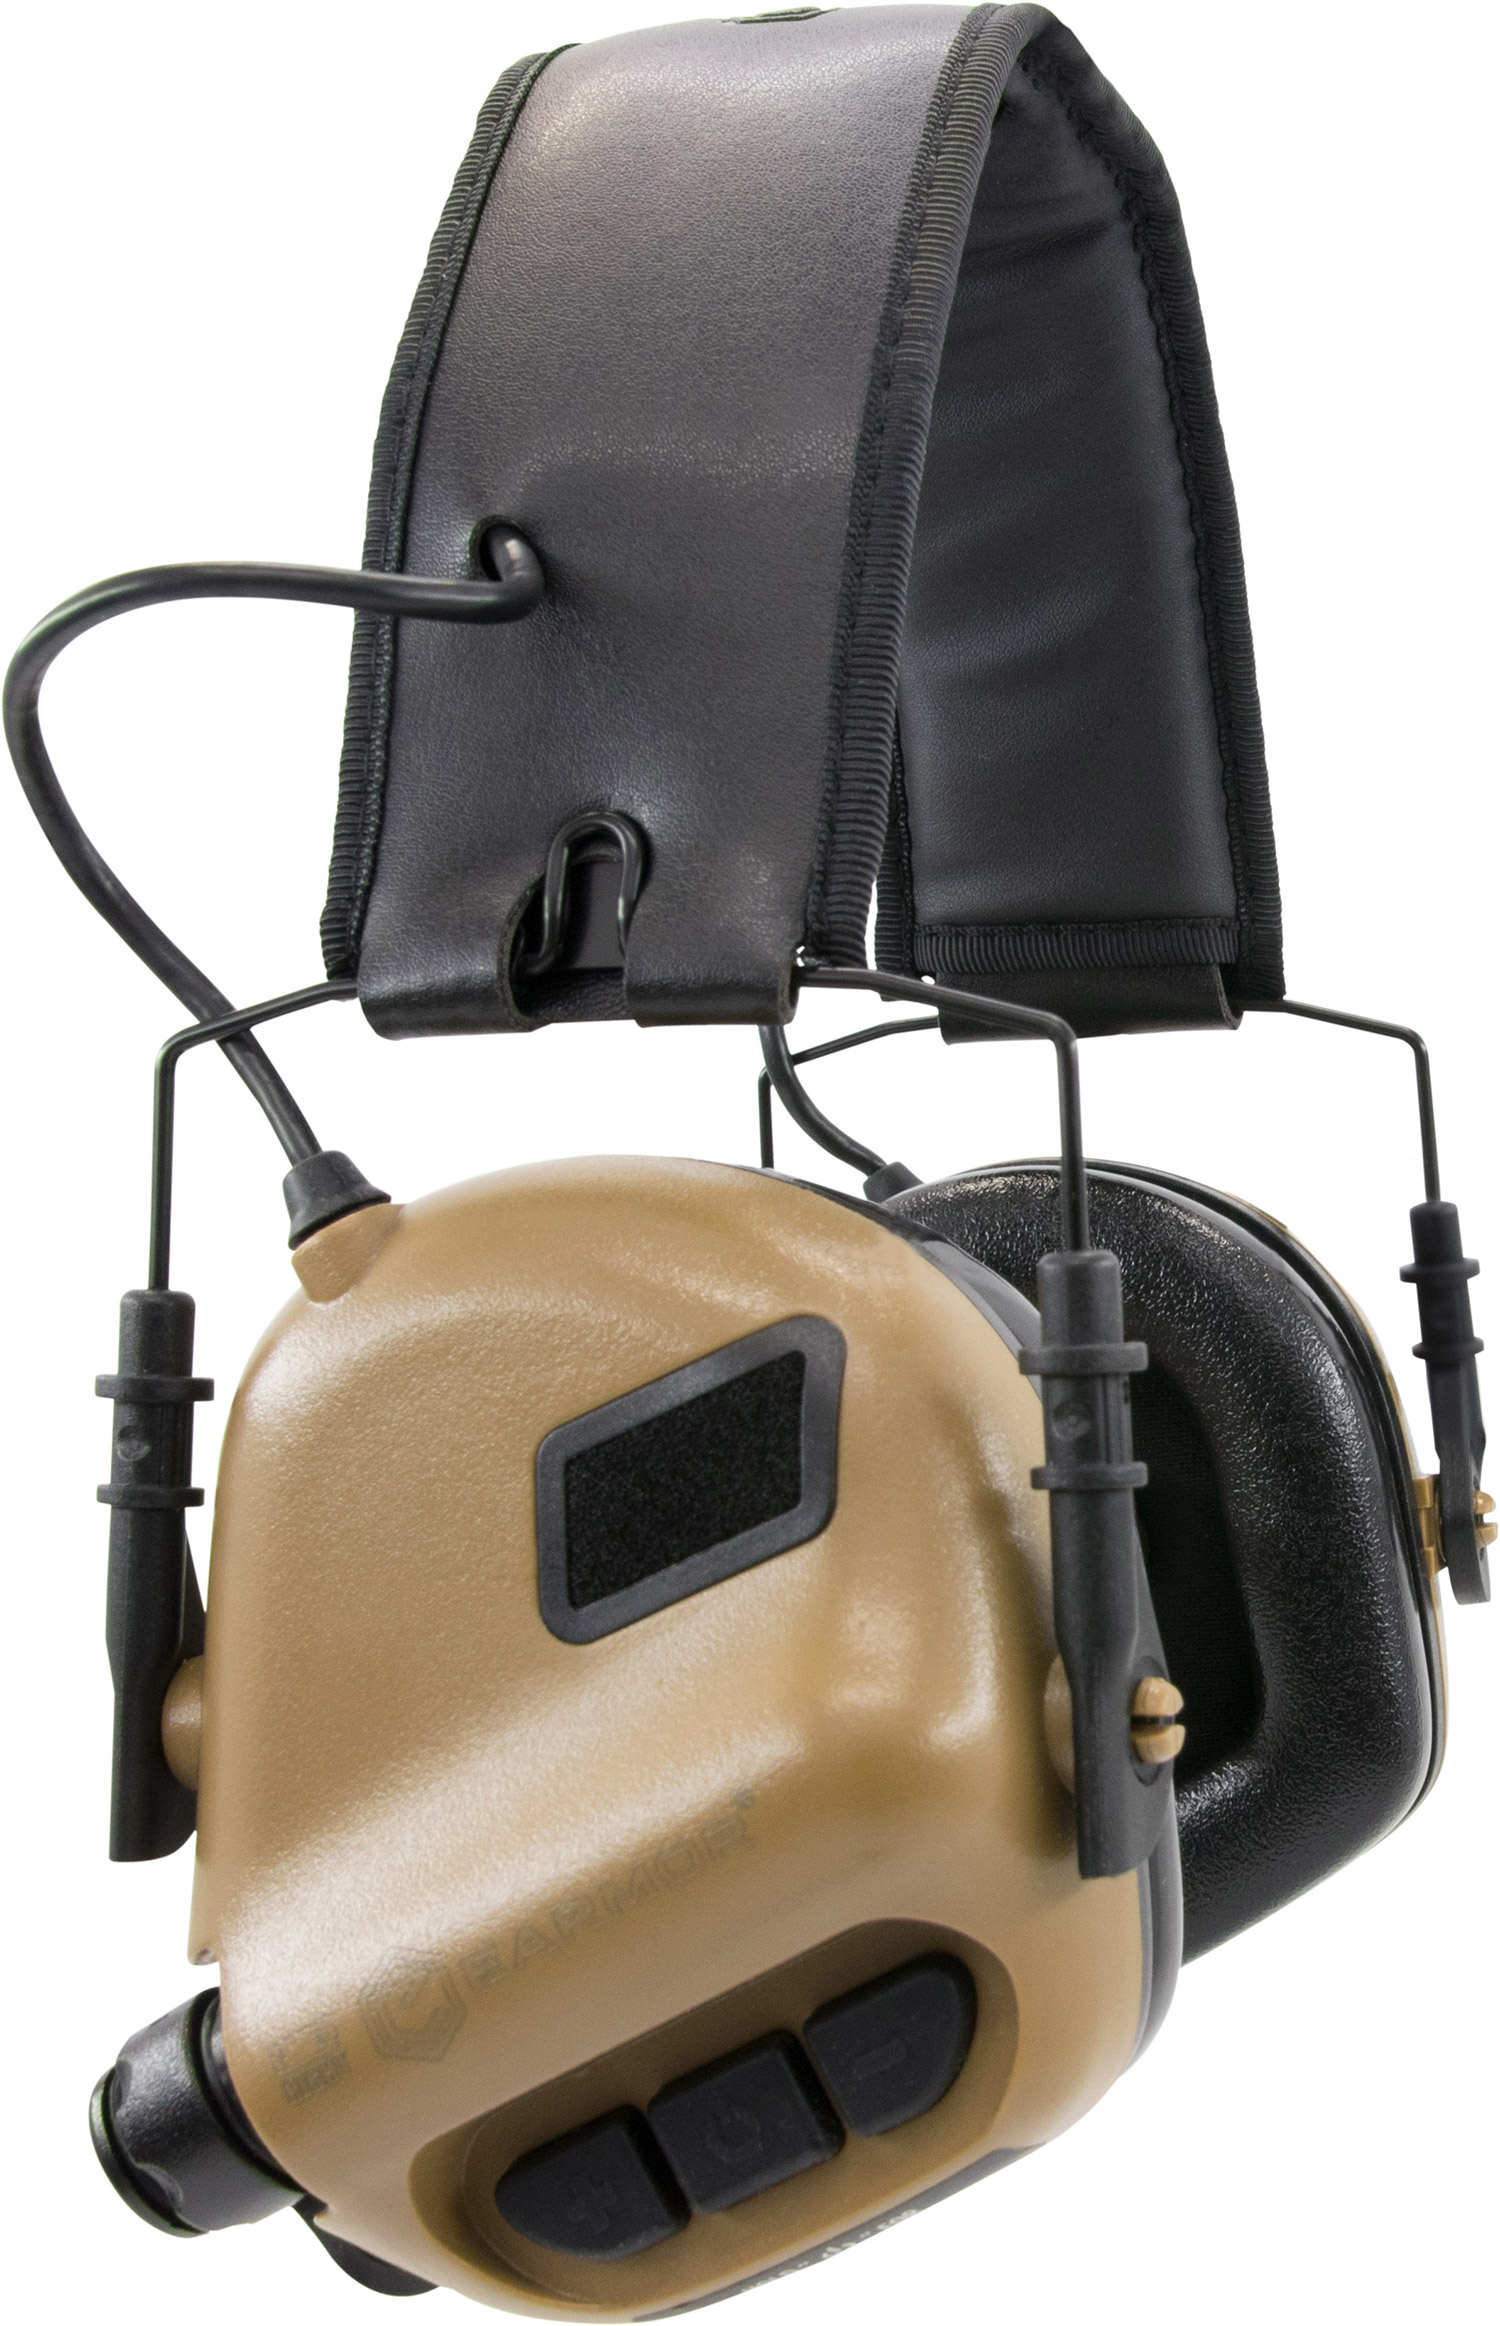 Details about   OPSMEN EARMOR Tactical Electronic Hearing Protector Headphone M31 MOD3 BROWN * 